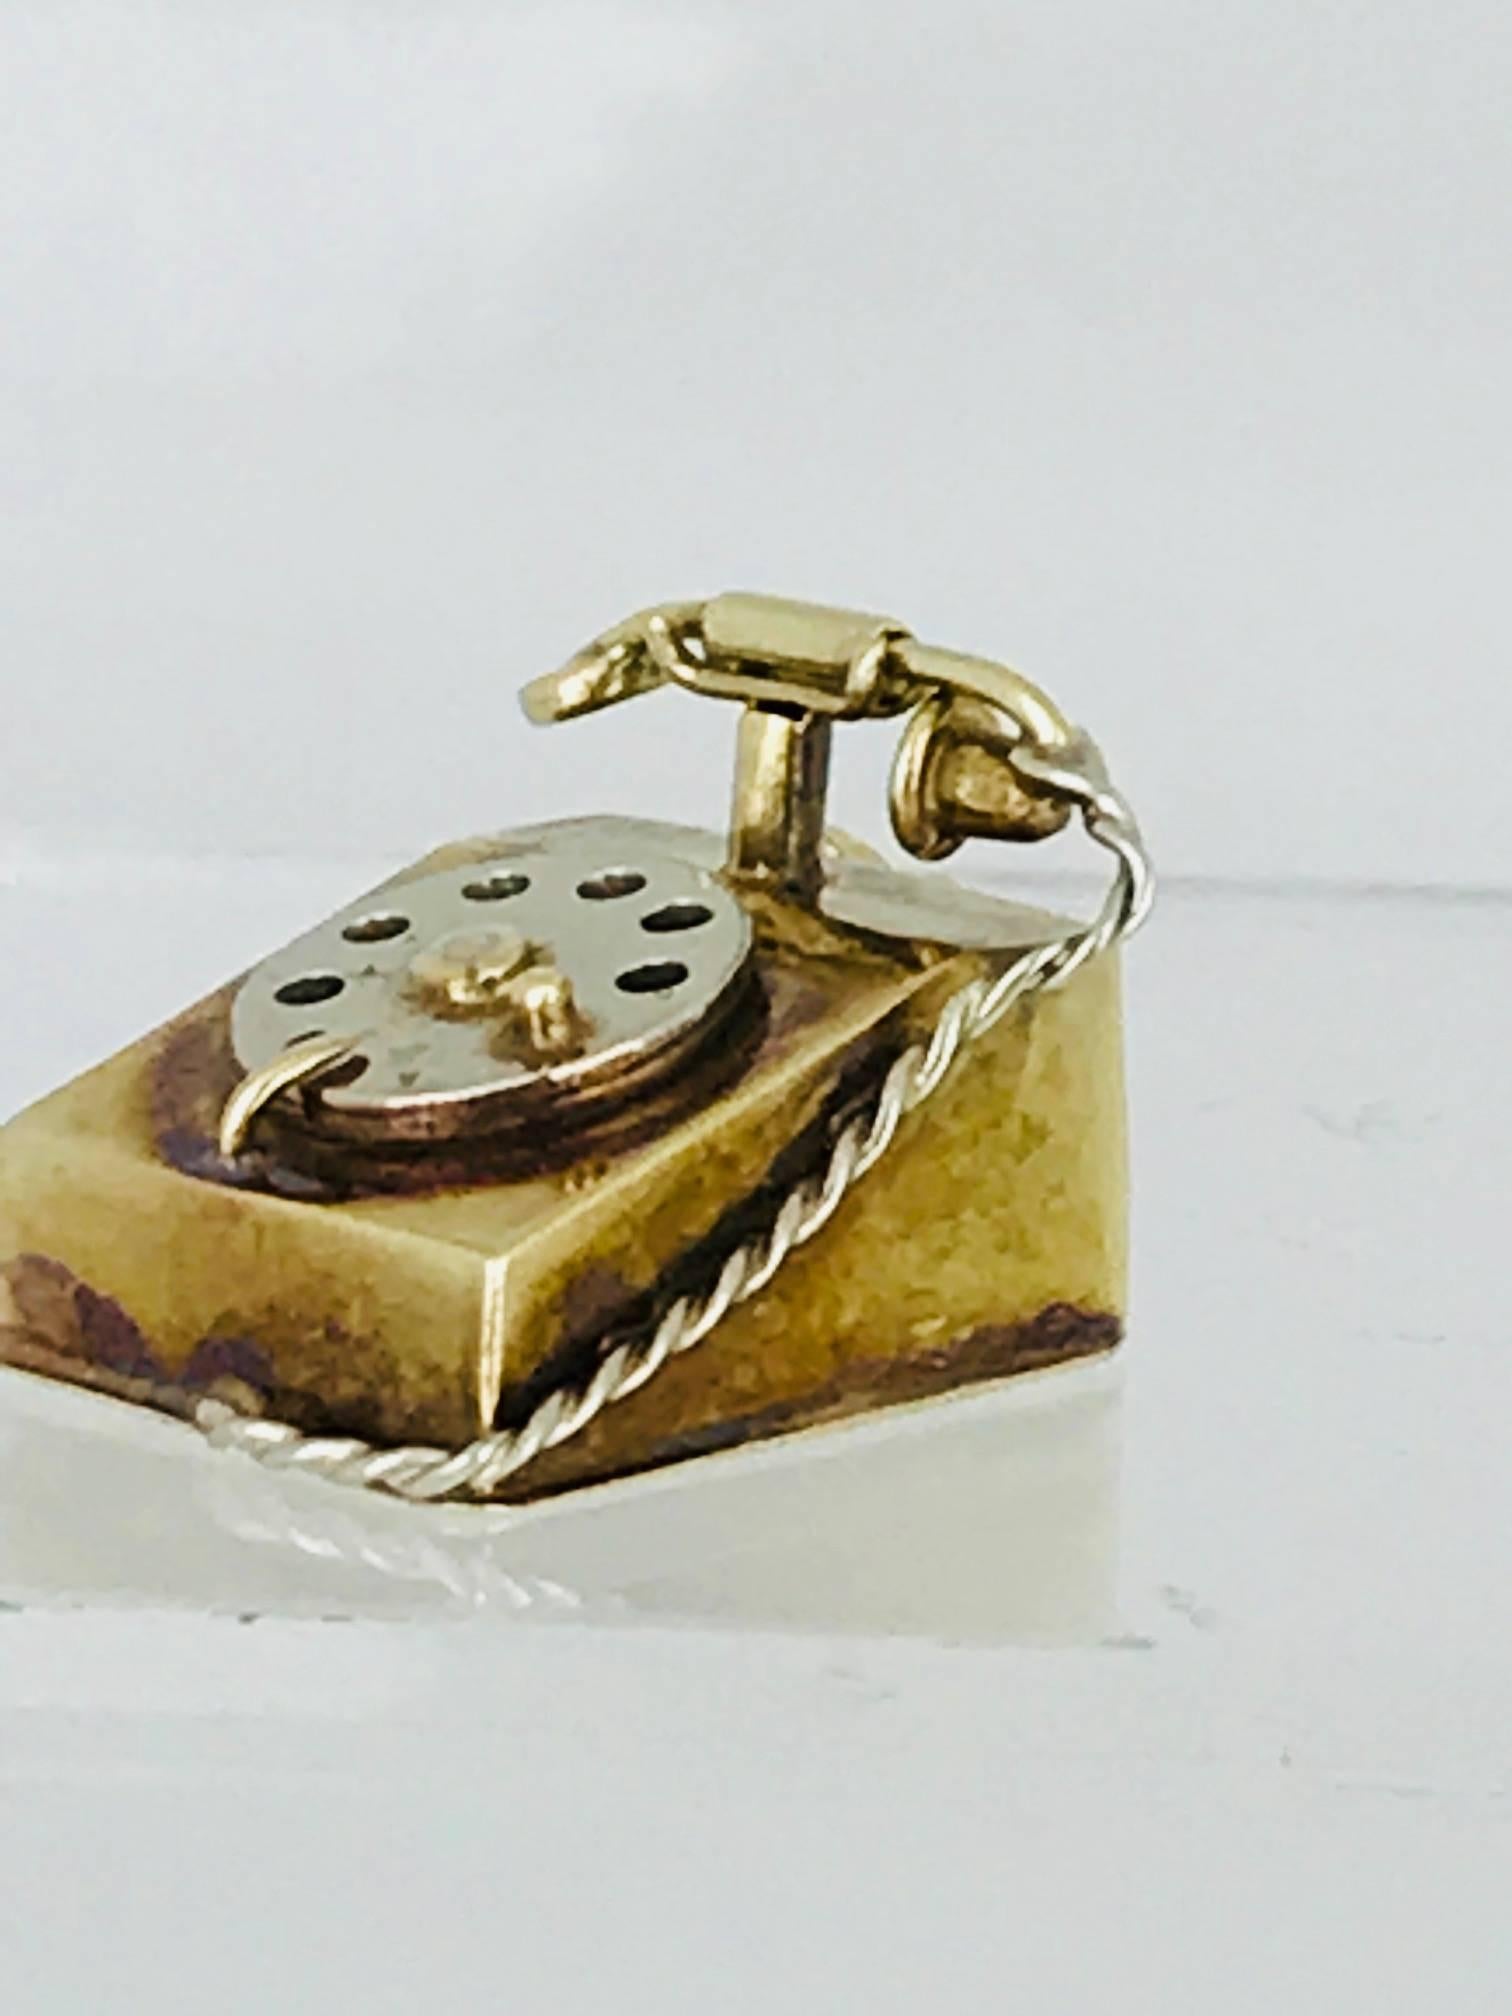 14 Karat yellow and white gold Telephone Charm make in 14 karat gold. 
The charm has detail and is handmade.
The circa is 1960
Modern

GIA Gemologist, inspected & evaluated